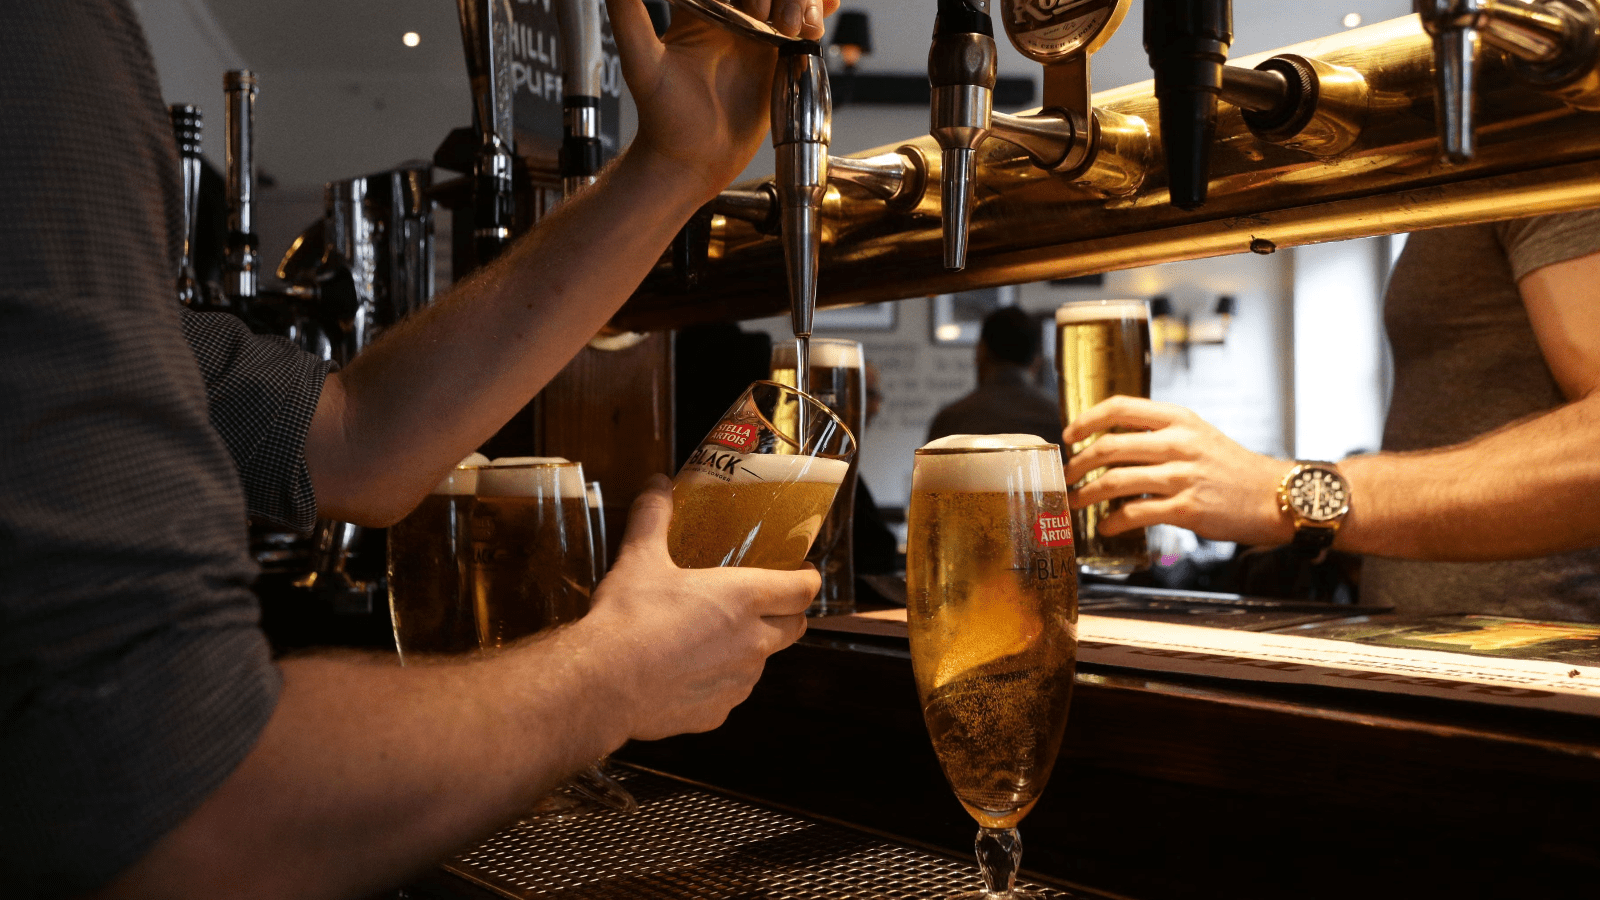 Study reveals climate change could diminish beer quality, escalate prices in future